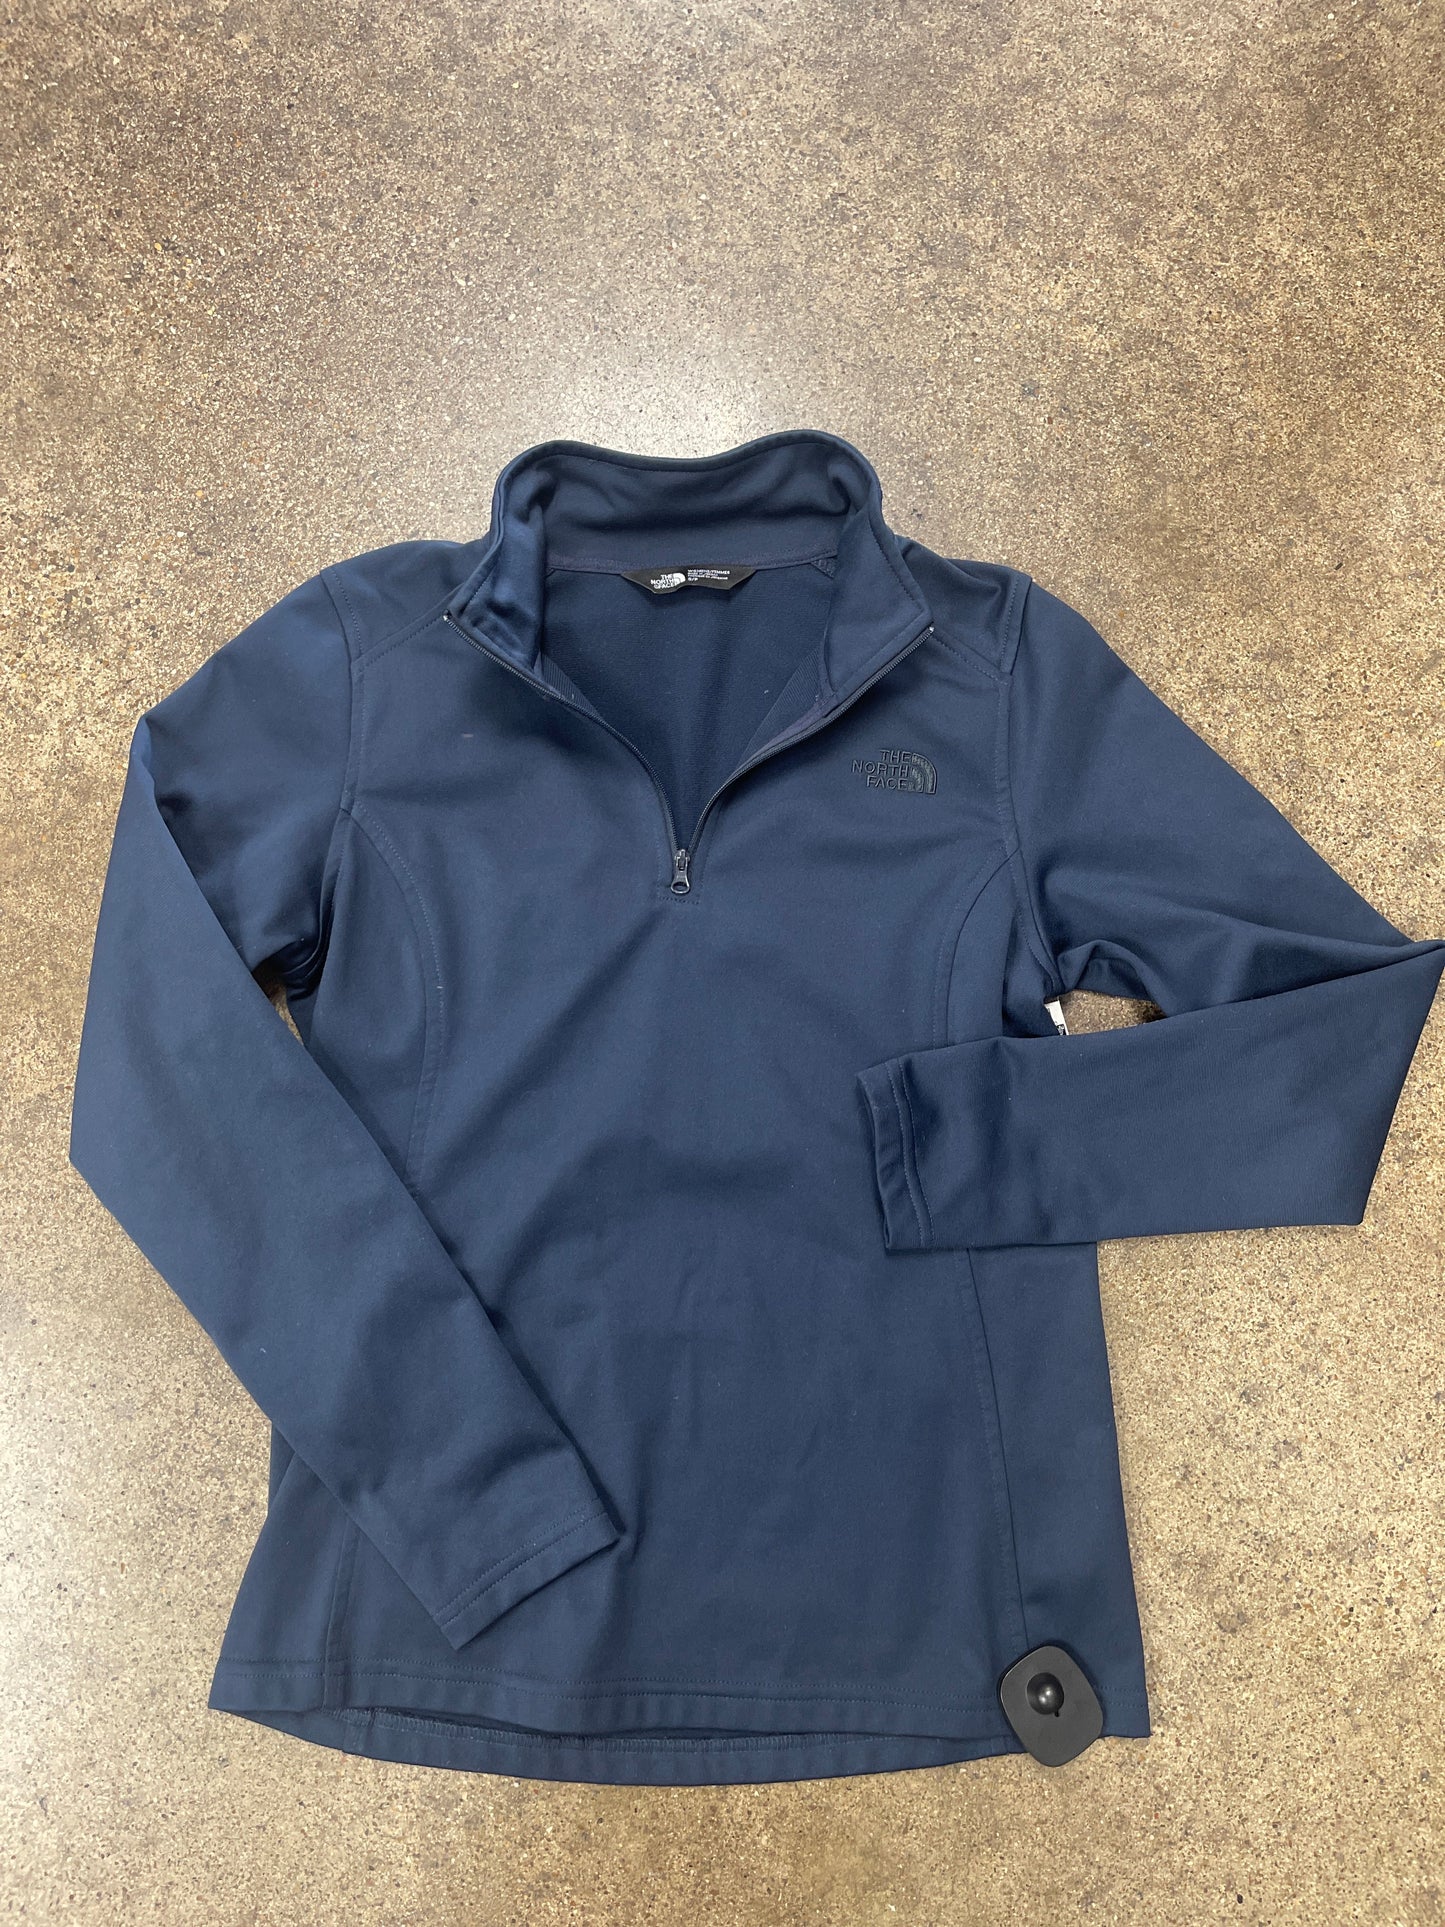 Navy Athletic Top Long Sleeve Collar The North Face, Size S